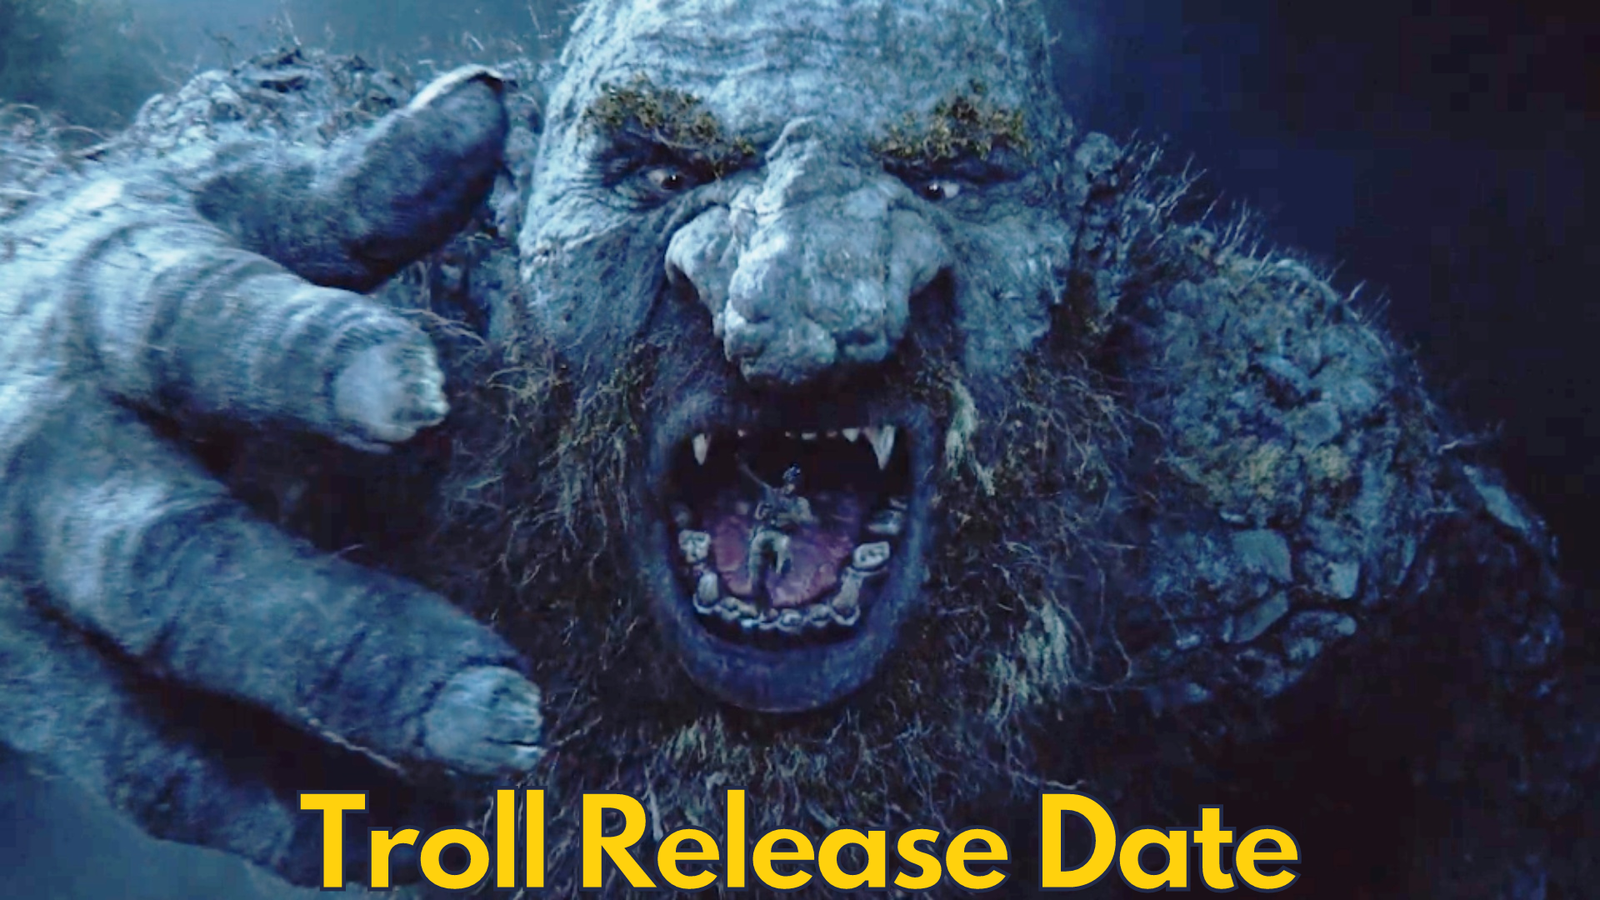 Does Troll have anything to do with Trolls?